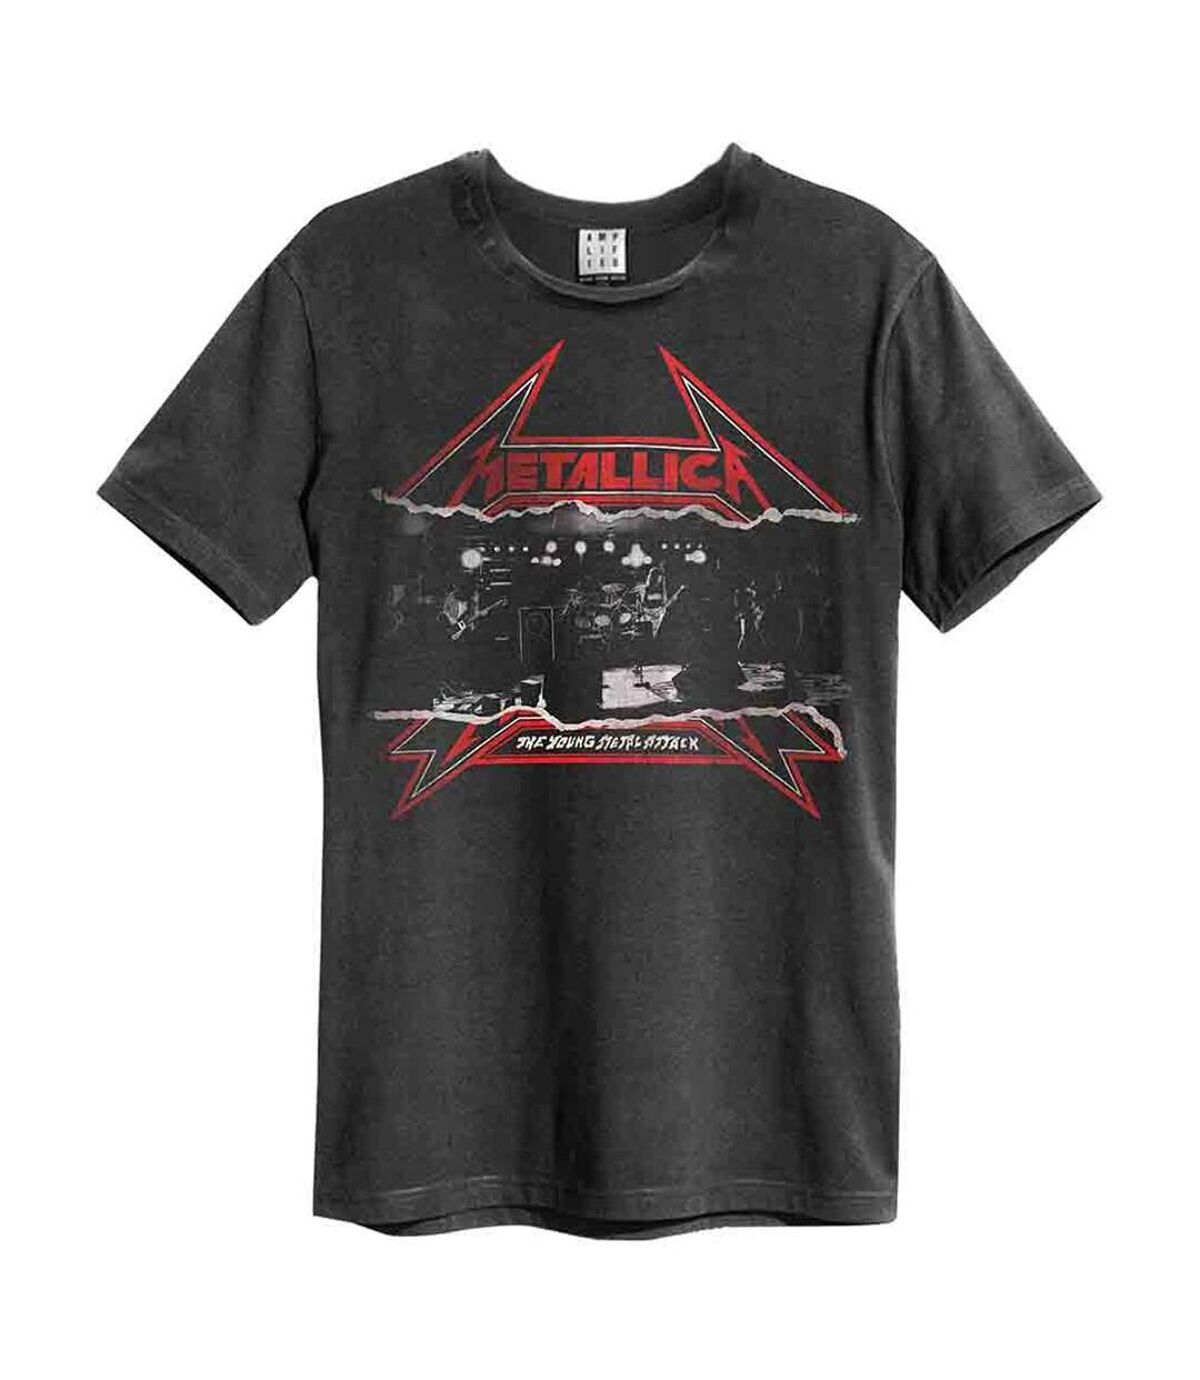 Amplified - T-shirt YOUNG METAL ATTACK - Adulte (Gris foncé) - UTGD259